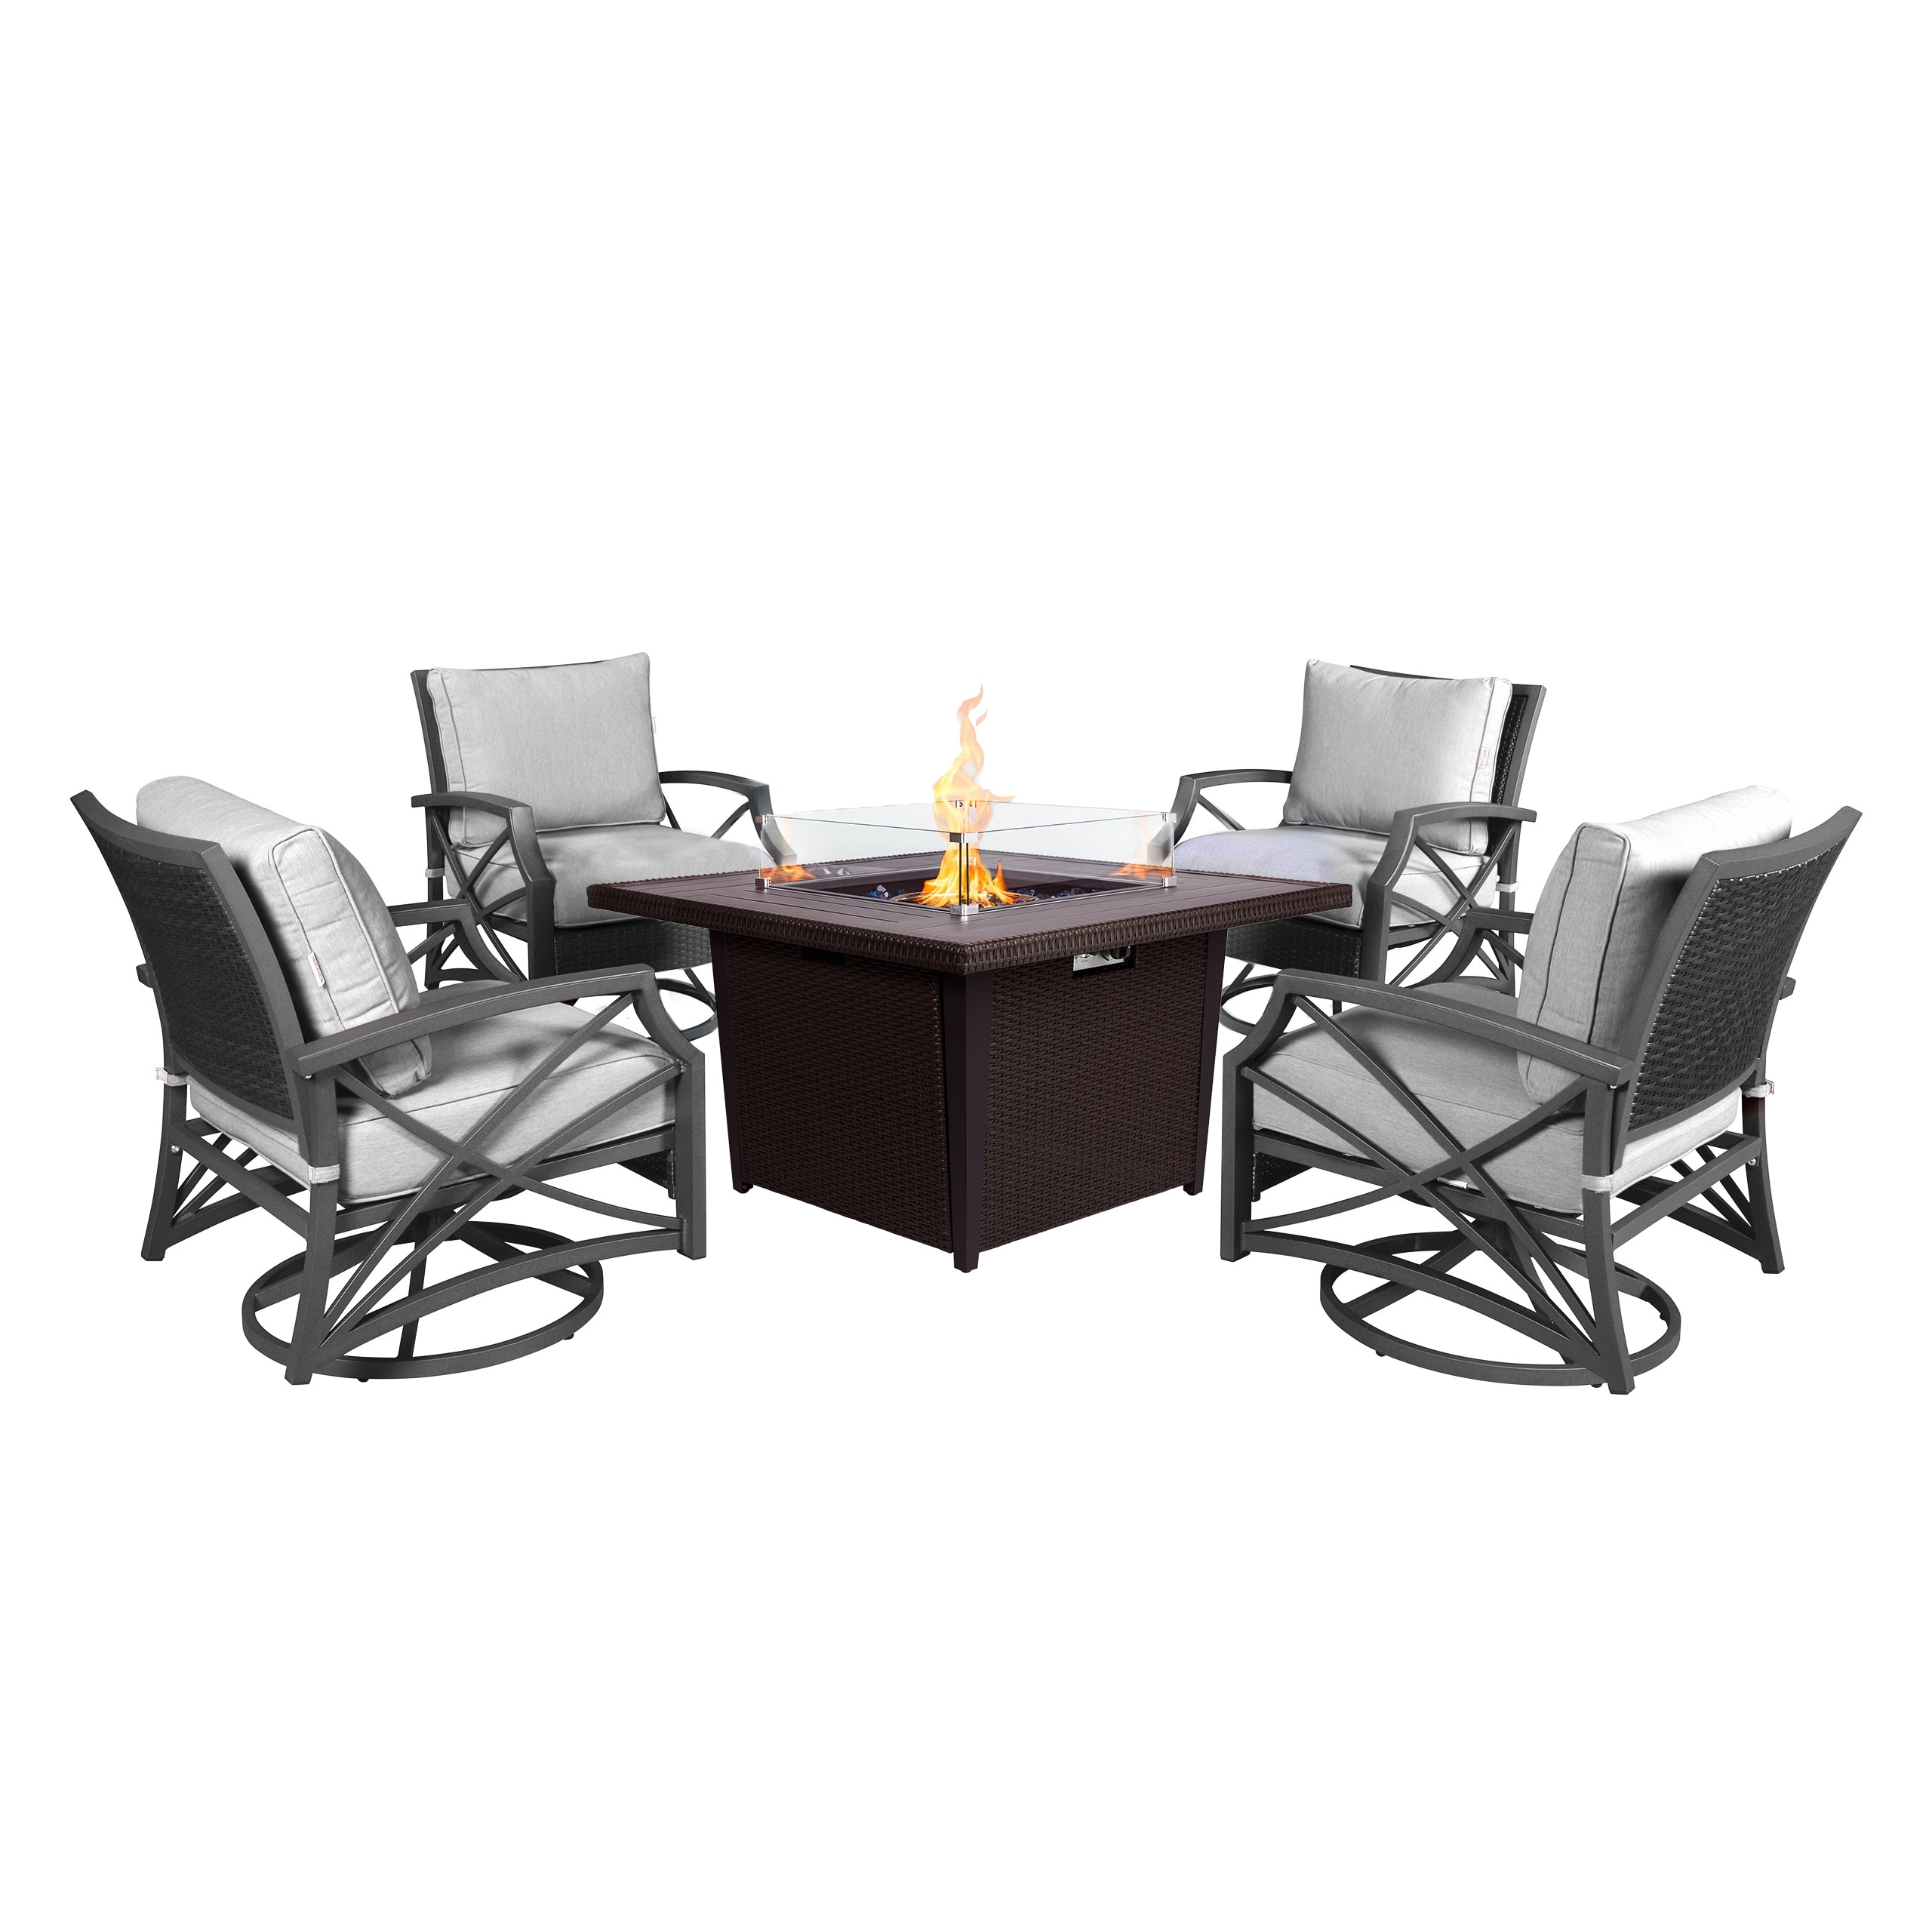 Ethan 5 Pc Propane Fire Pit Table Set For Patio (50 000 Btu)